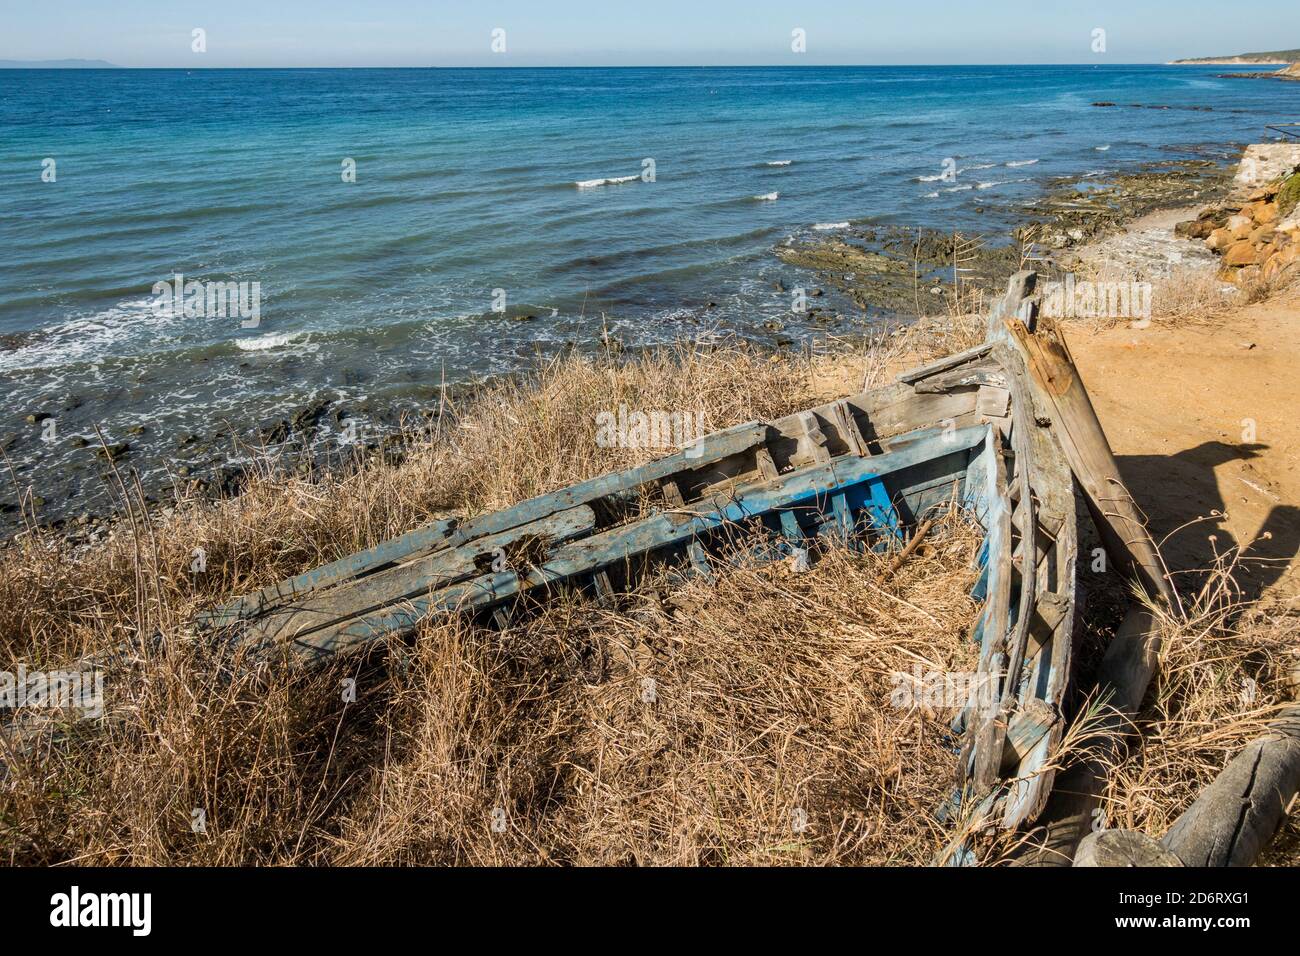 Remains of an old wooden boat buried in the sand dunes, beach behind, Tarifa, Spain. Stock Photo